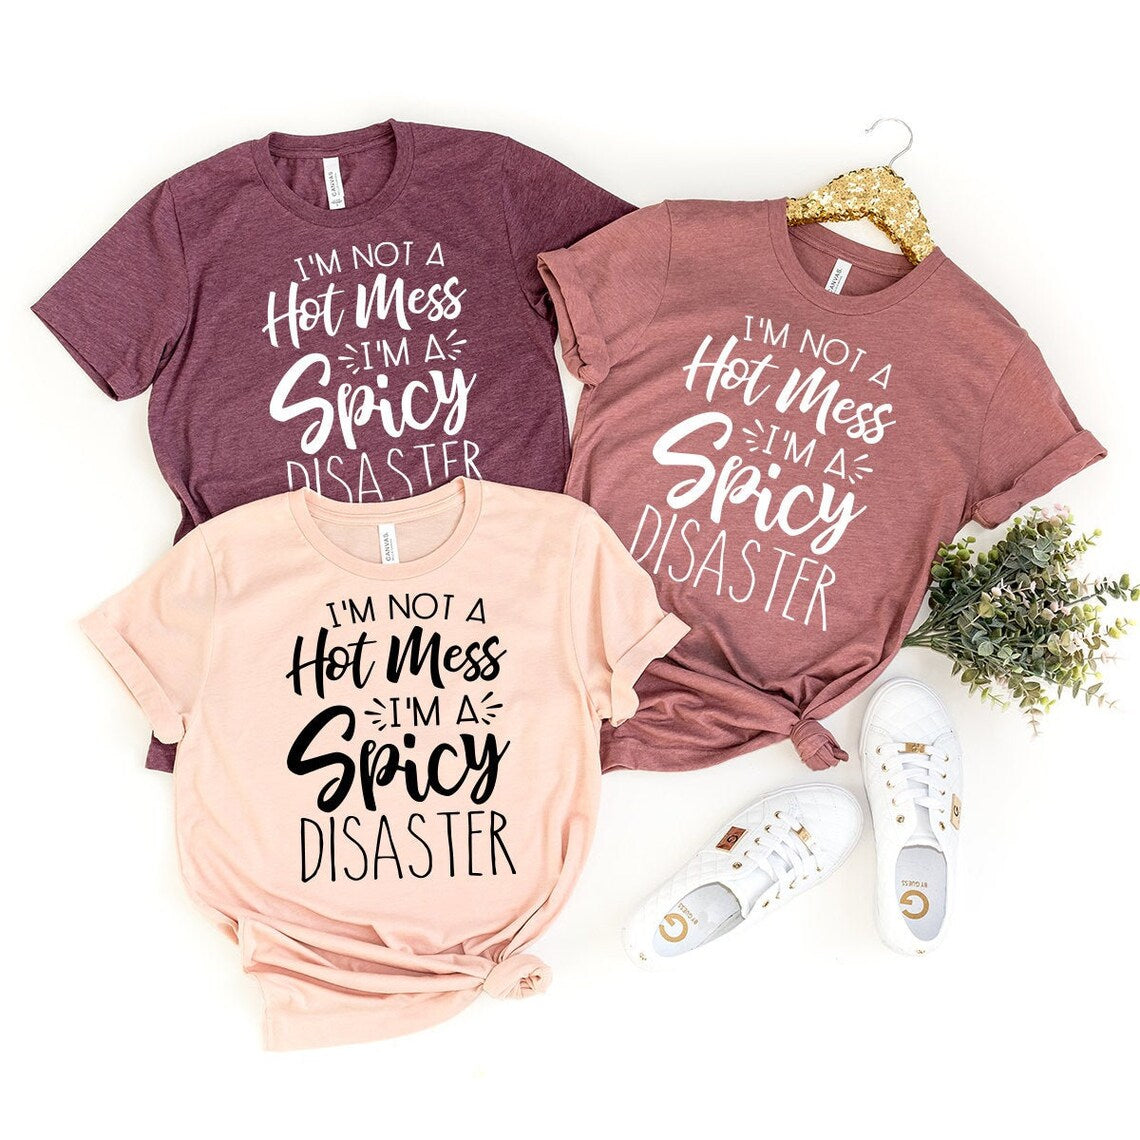 I am Not A Hot Mess I Am A Spicy Disaster Tee,Gift For Girl Friend,Funny Quote Shirt